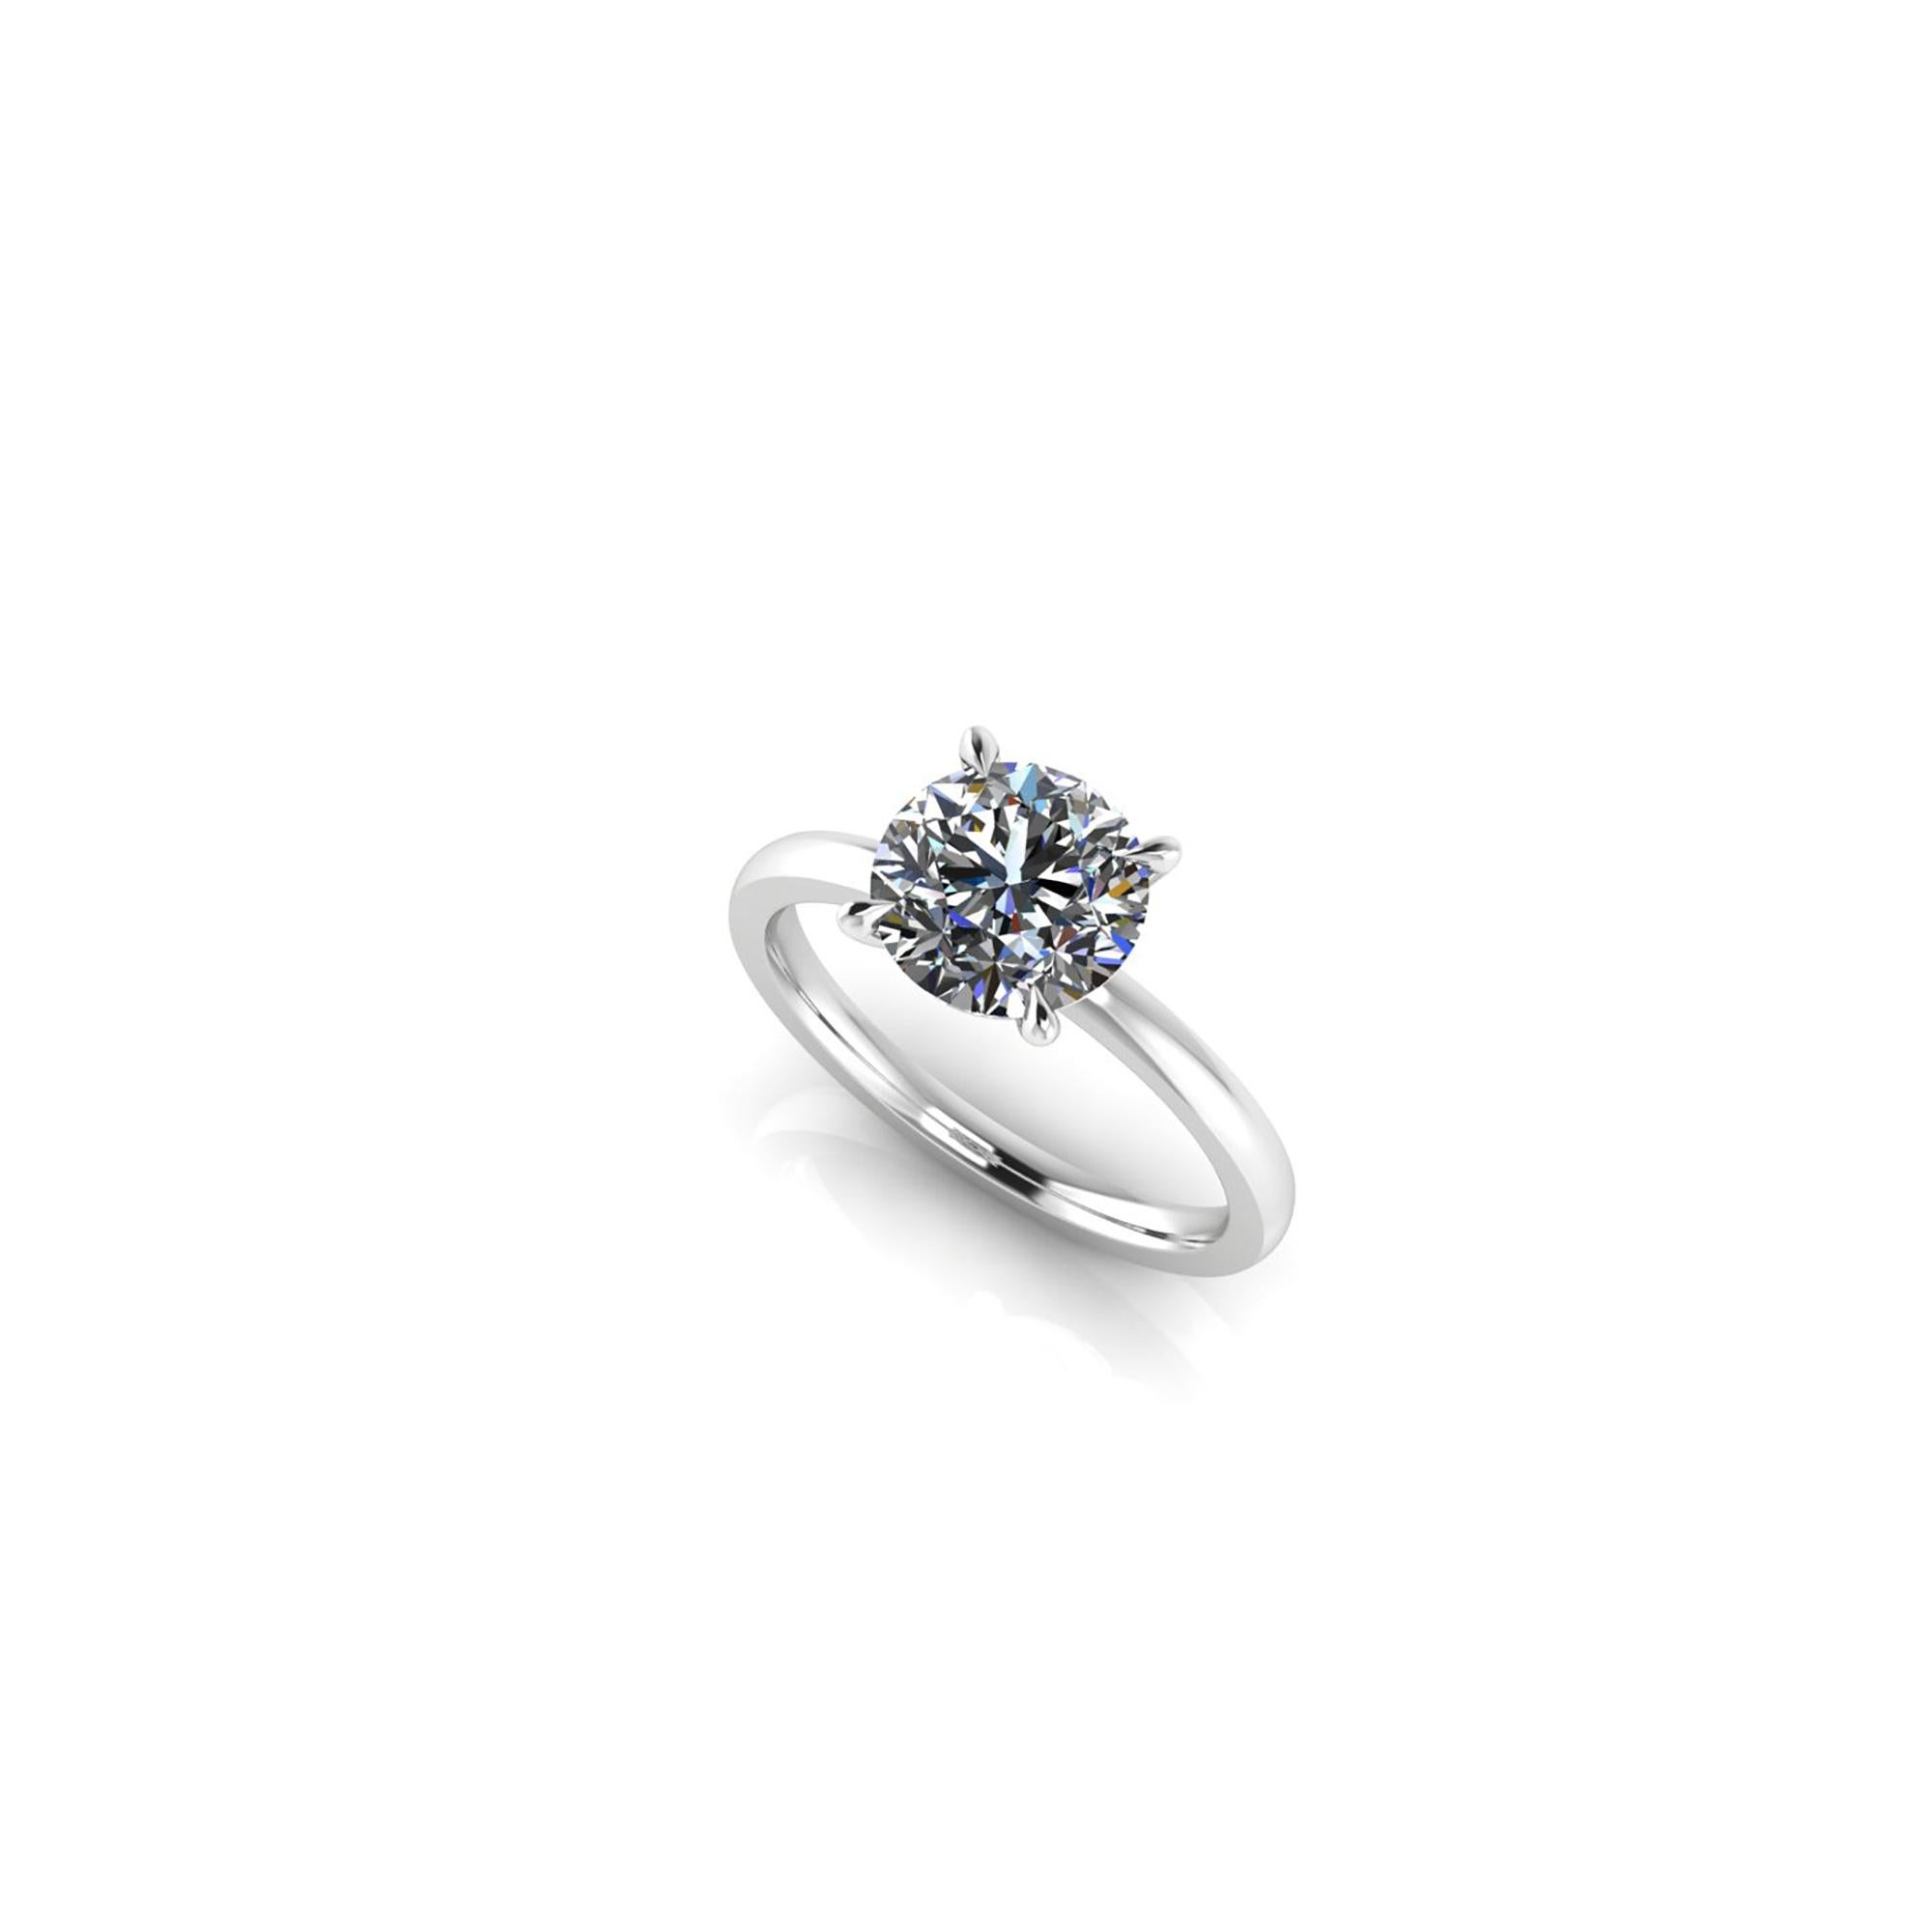 Modern GIA Certified 2.05 Carat White Diamond in Platinum 950 Solitaire Engagement Ring For Sale